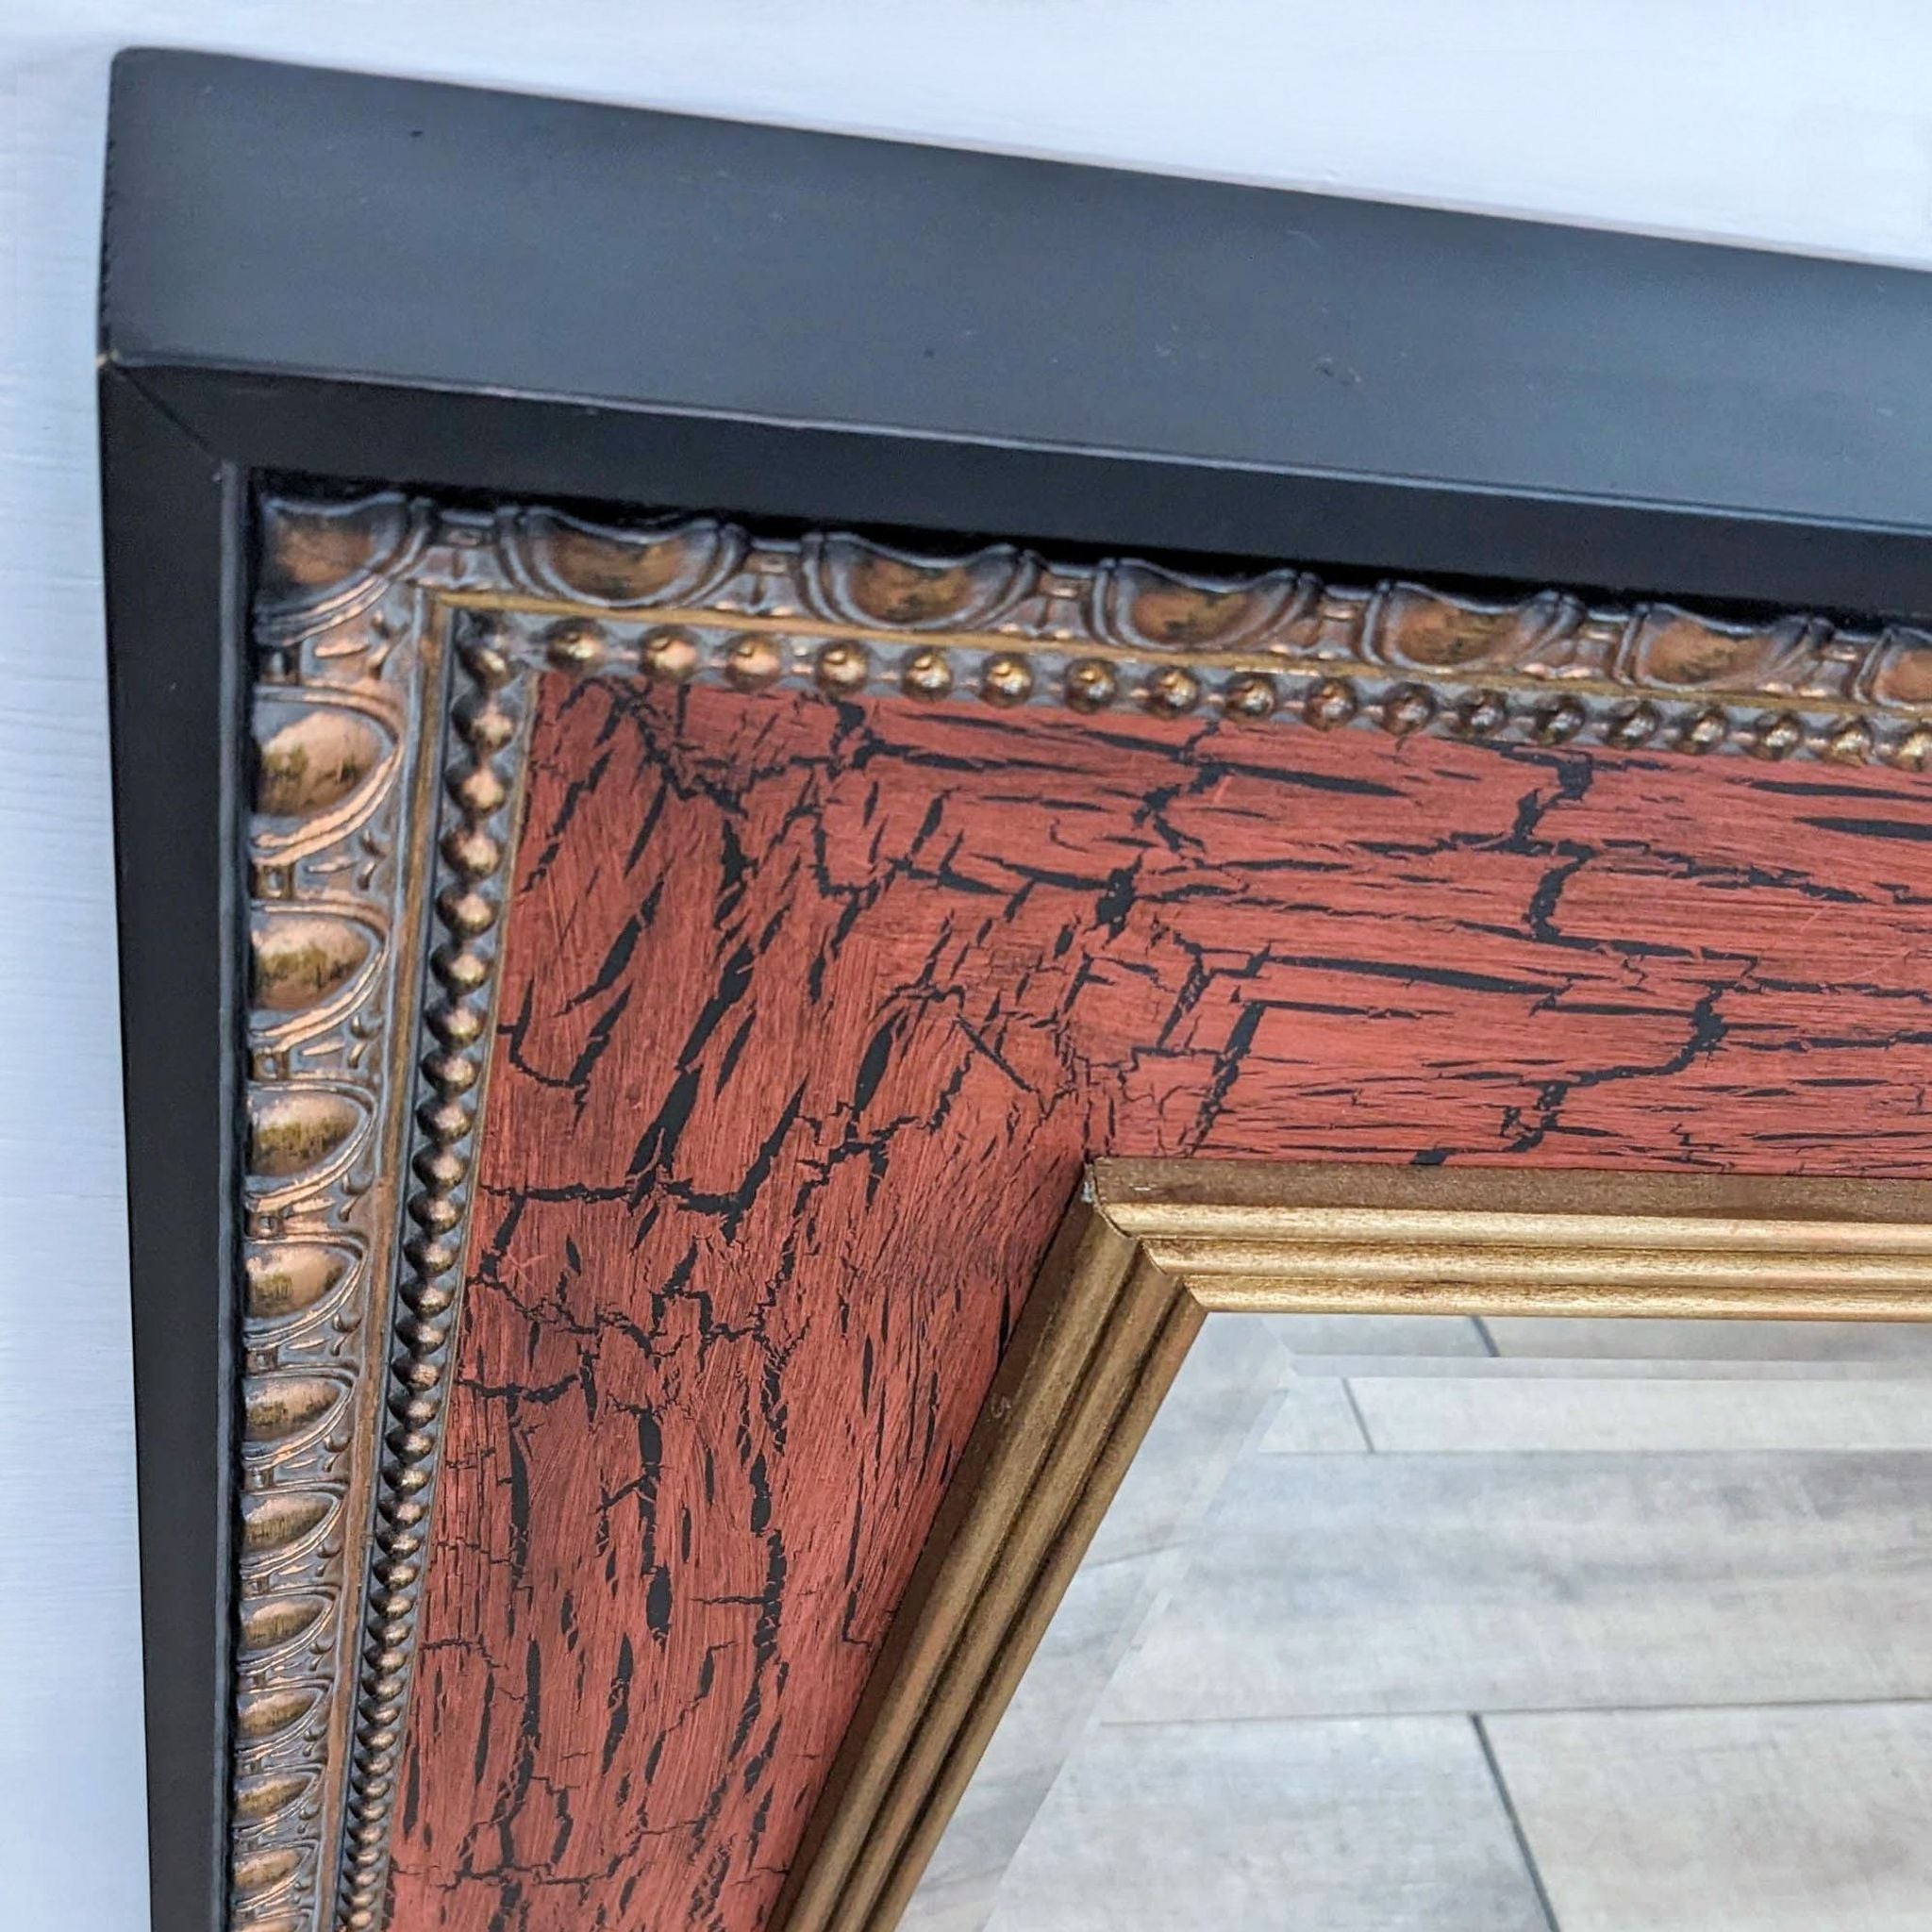 Close-up of John Richard beveled mirror's frame, showcasing the detailed crackle finish and gold accents.